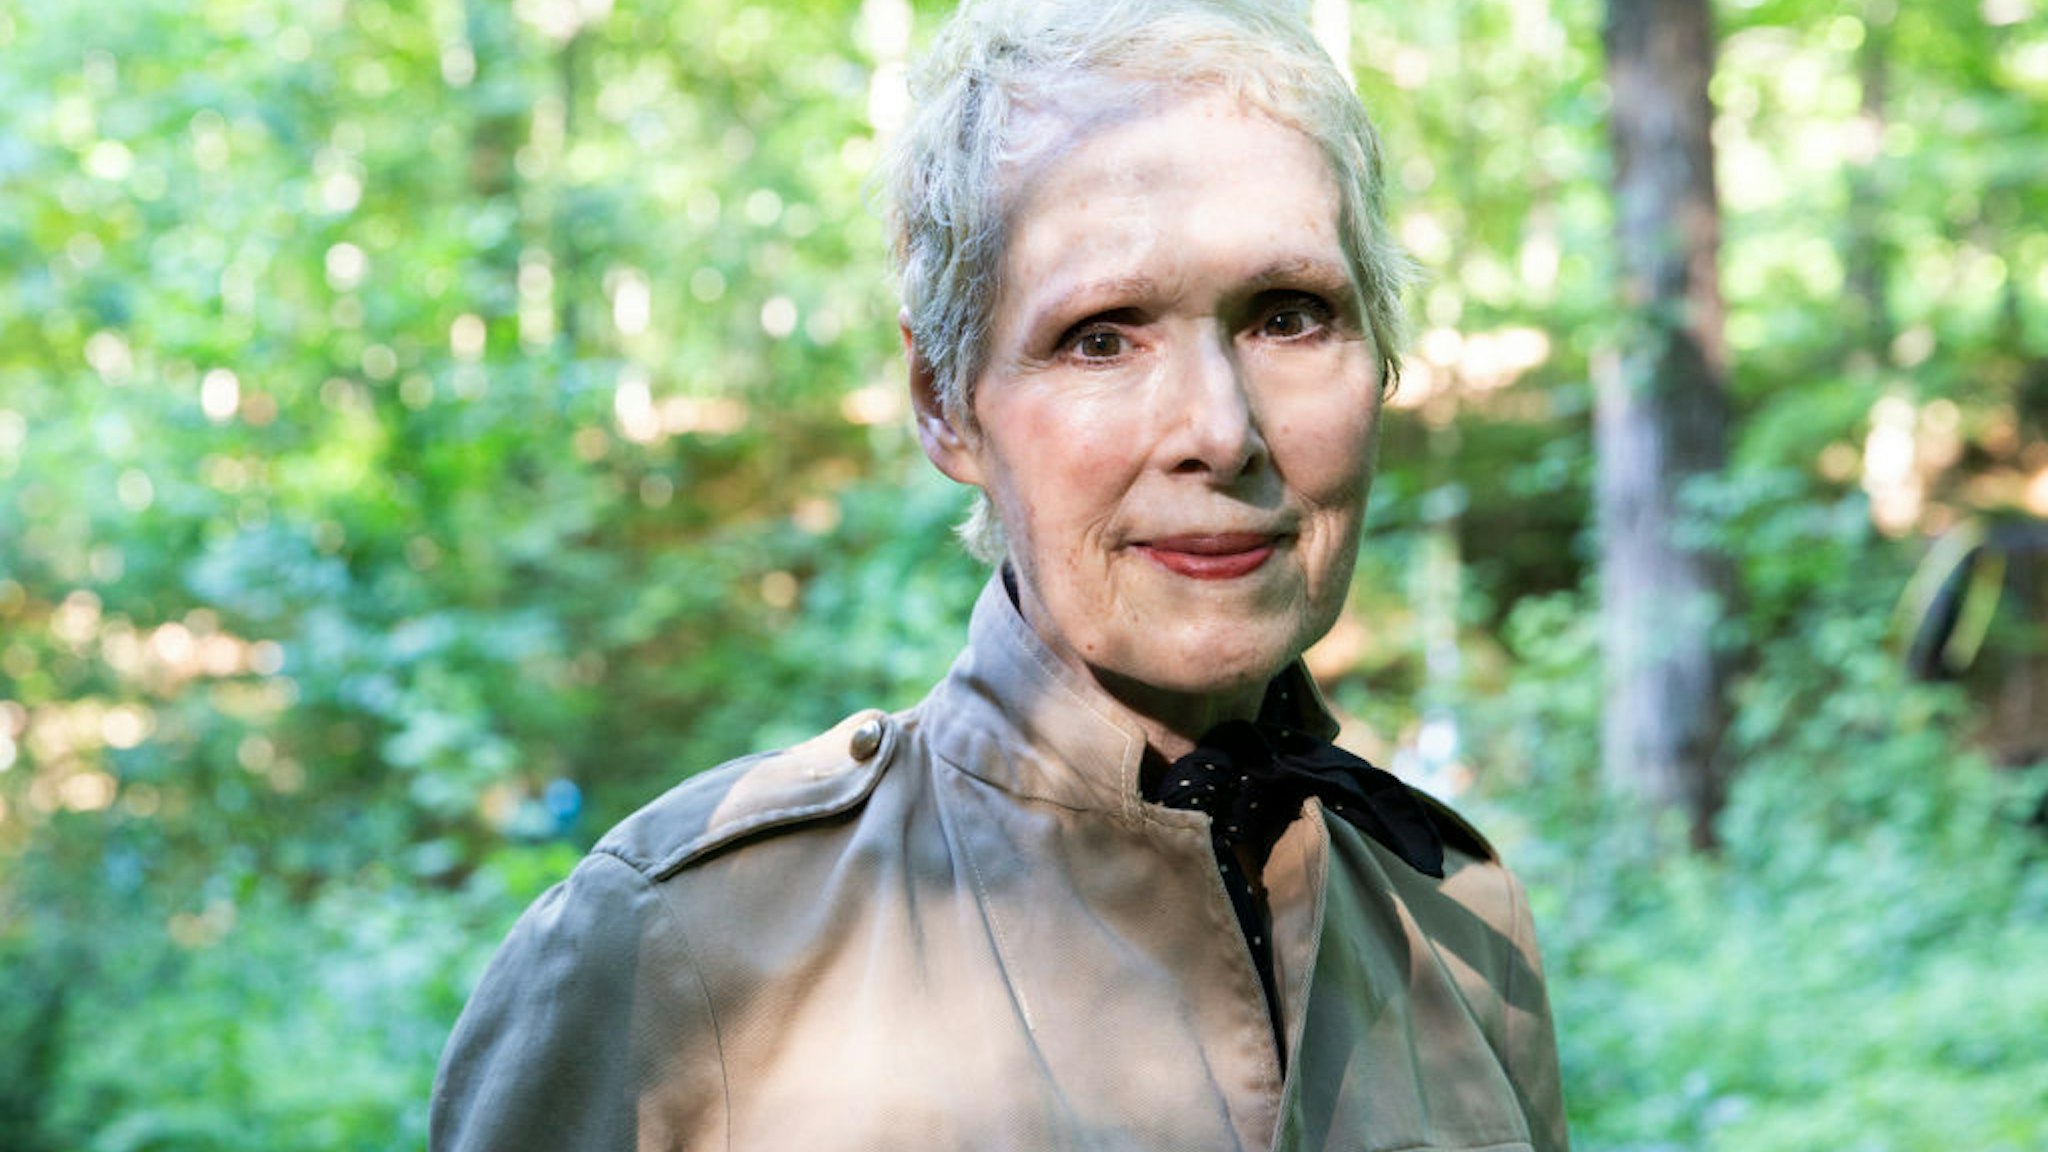 E. Jean Carroll at her home in Warwick, NY. Carroll claims that Donald Trump sexually assaulted her in a dressing room at a Manhattan department store in the mid-1990s. Trump denies knowing Carroll.(